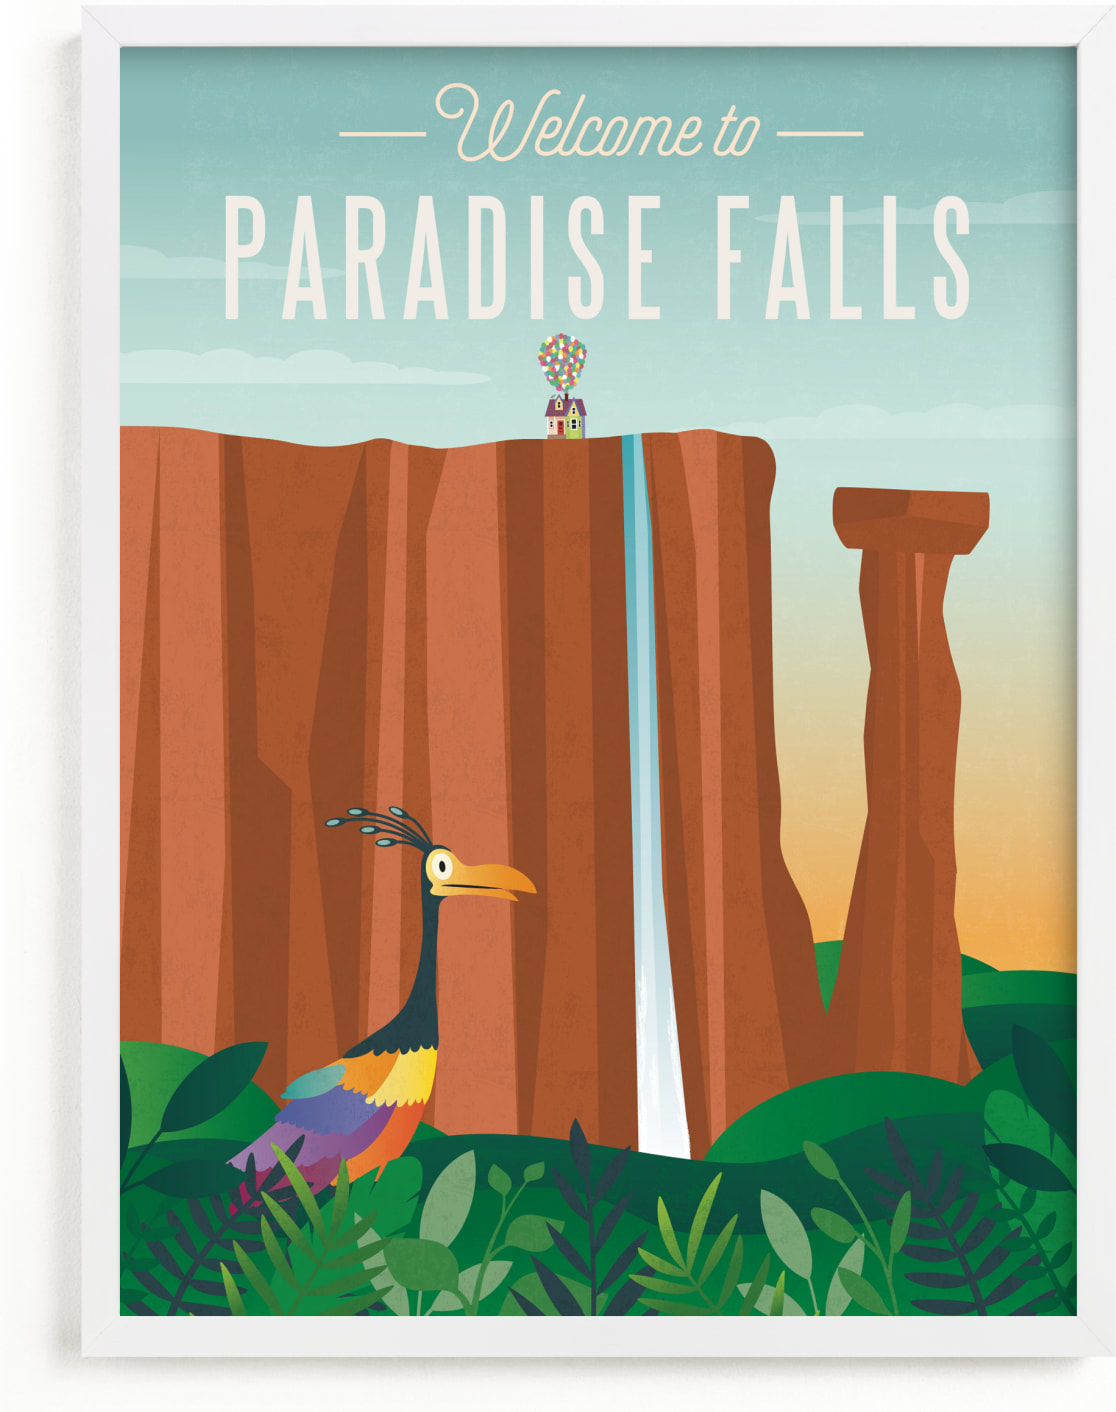 This is a blue disney art by Erica Krystek called Welcome to Paradise Falls from Disney and Pixar's Up.